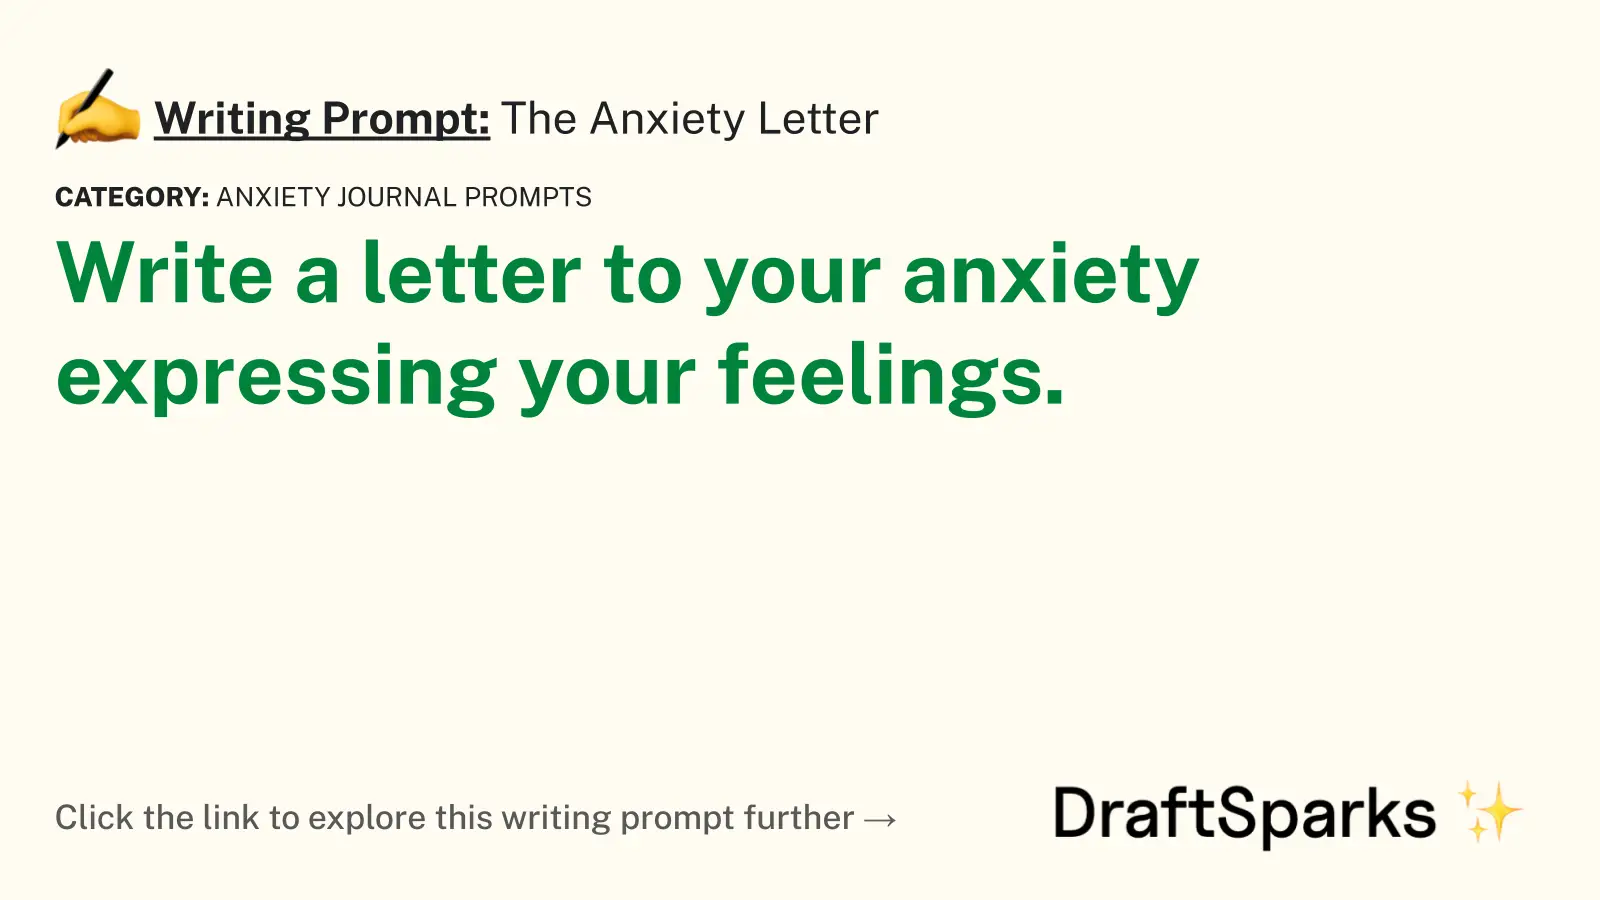 The Anxiety Letter